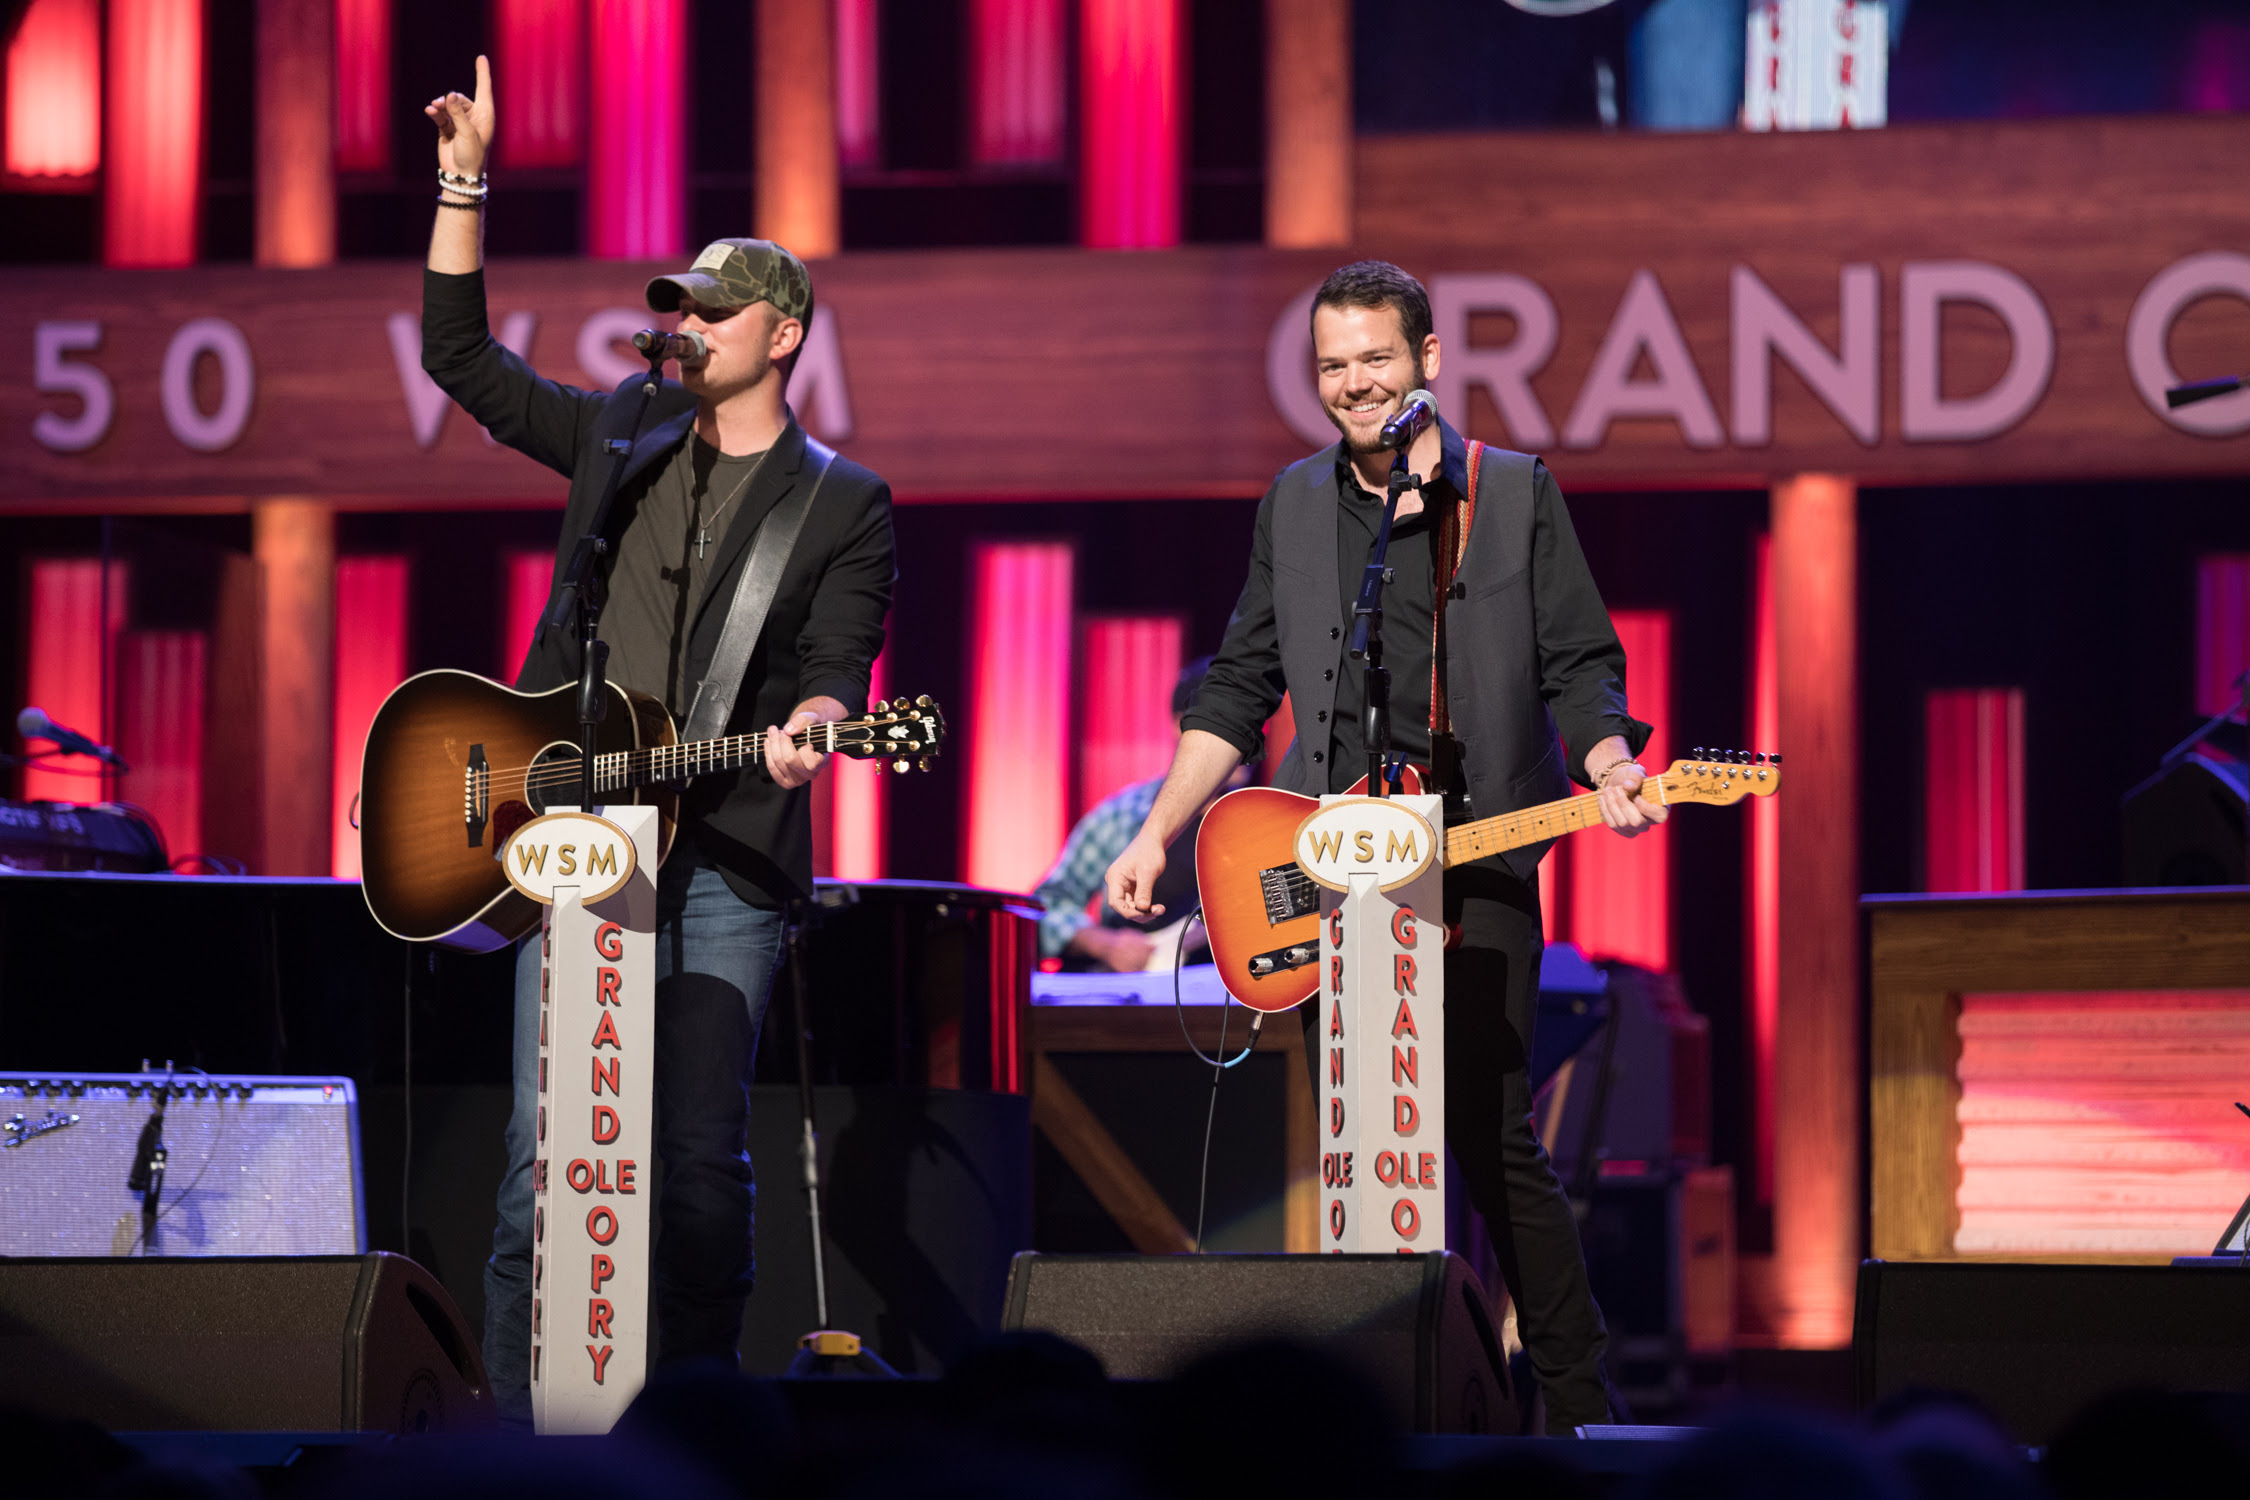 Walker McGuire Makes Grand Ole Opry Debut – All the Details on Their Performance